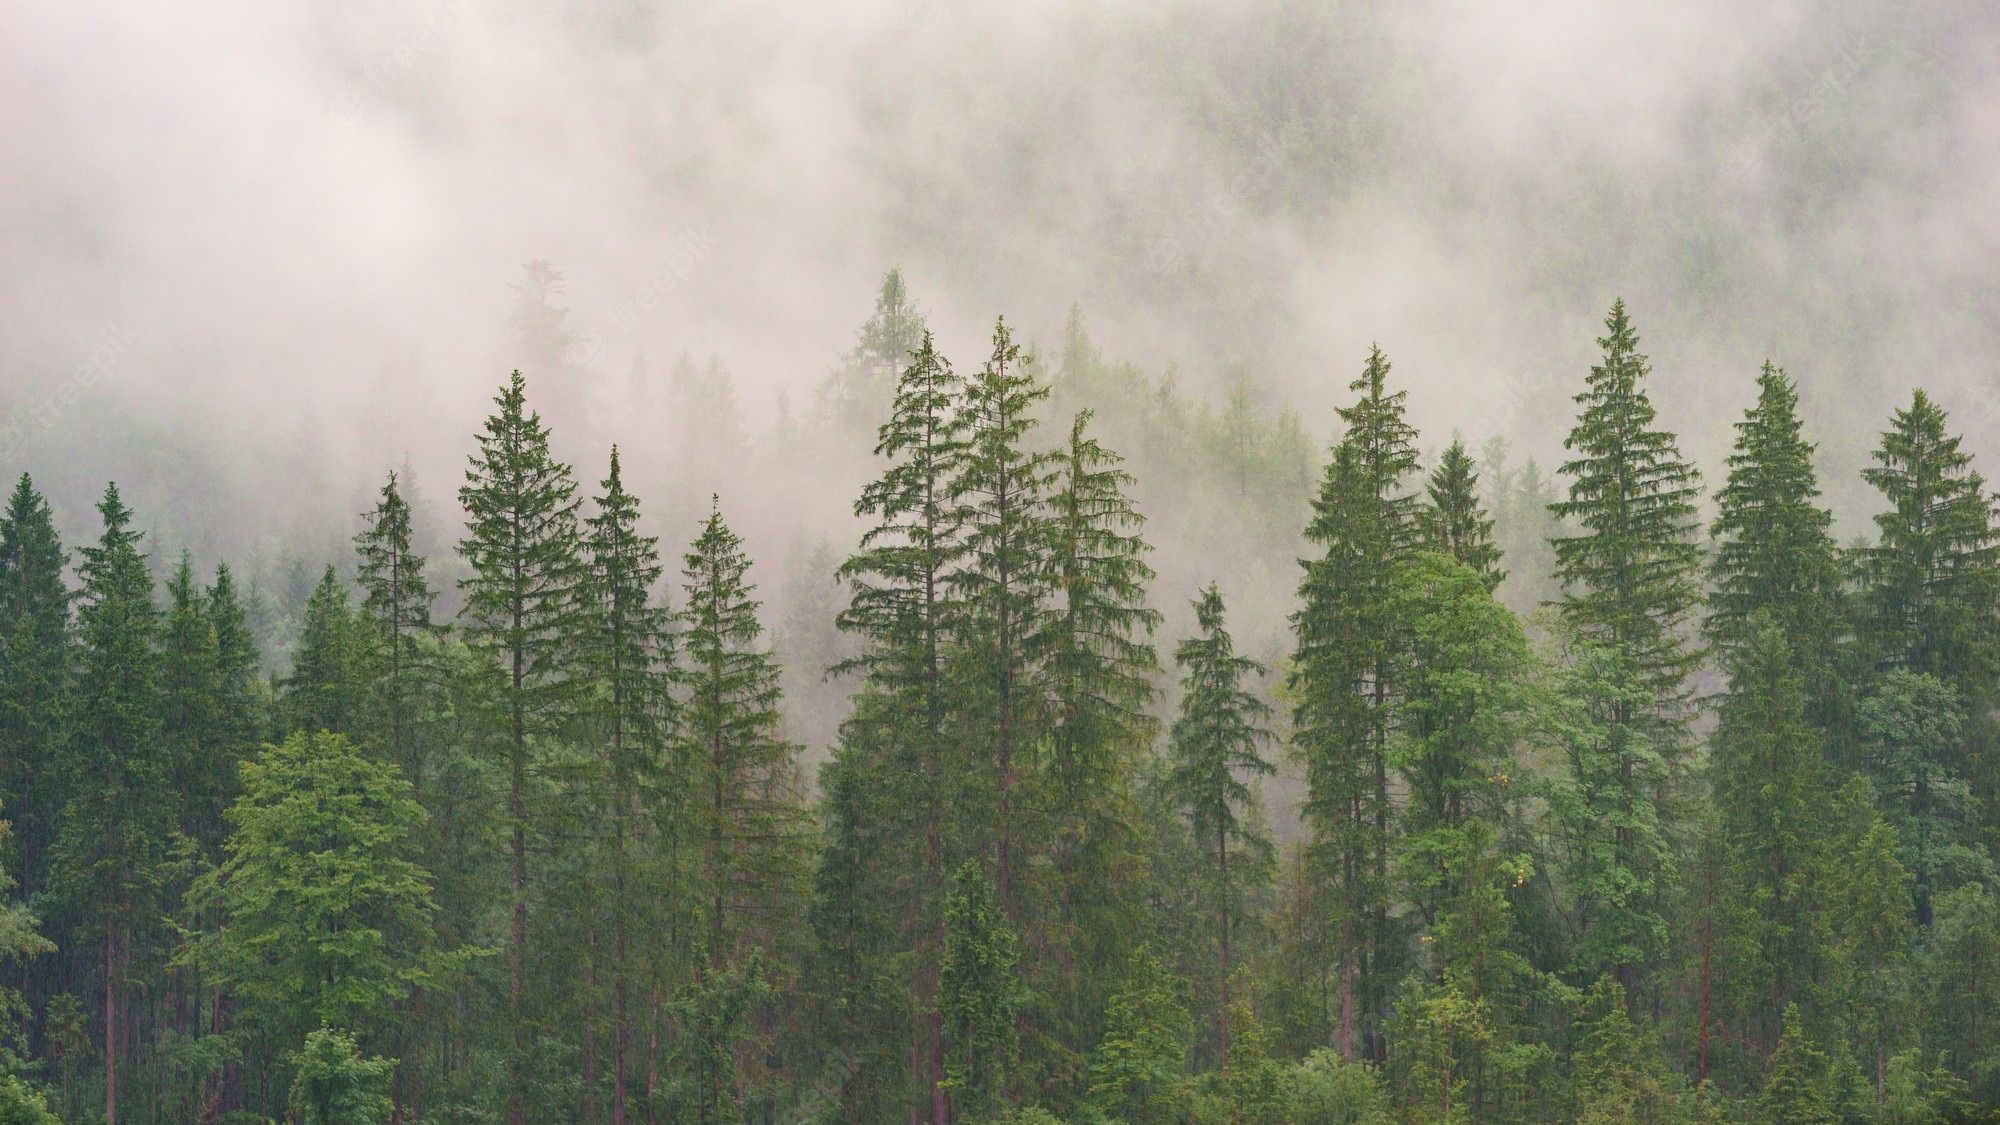 Foggy Pine Forest Image